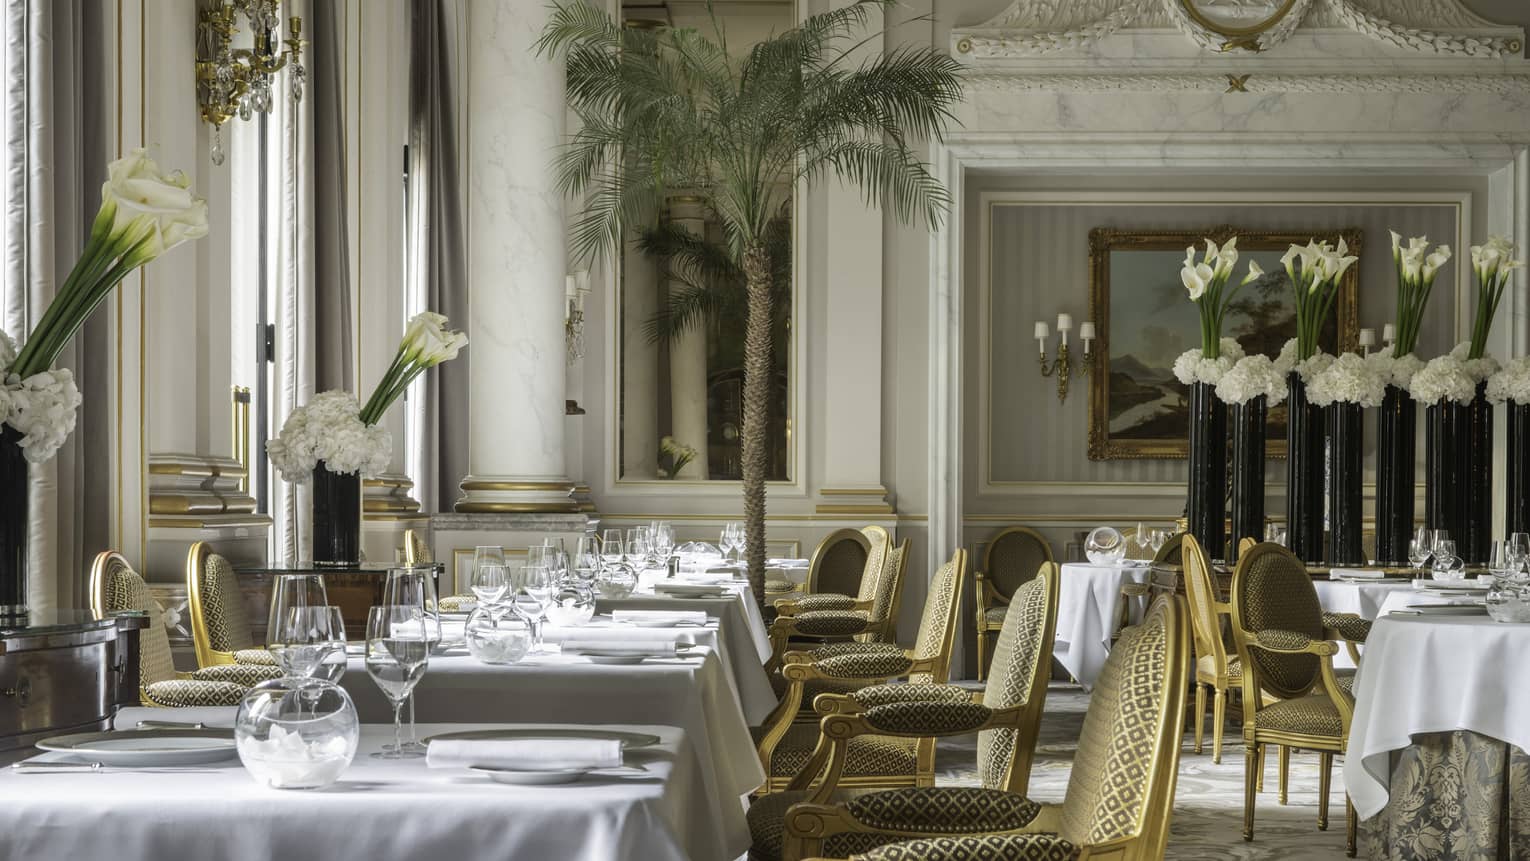 Interior view of elegant restaurant with gold upholstered chairs, white table clothes, white lilies, marble columns and molding